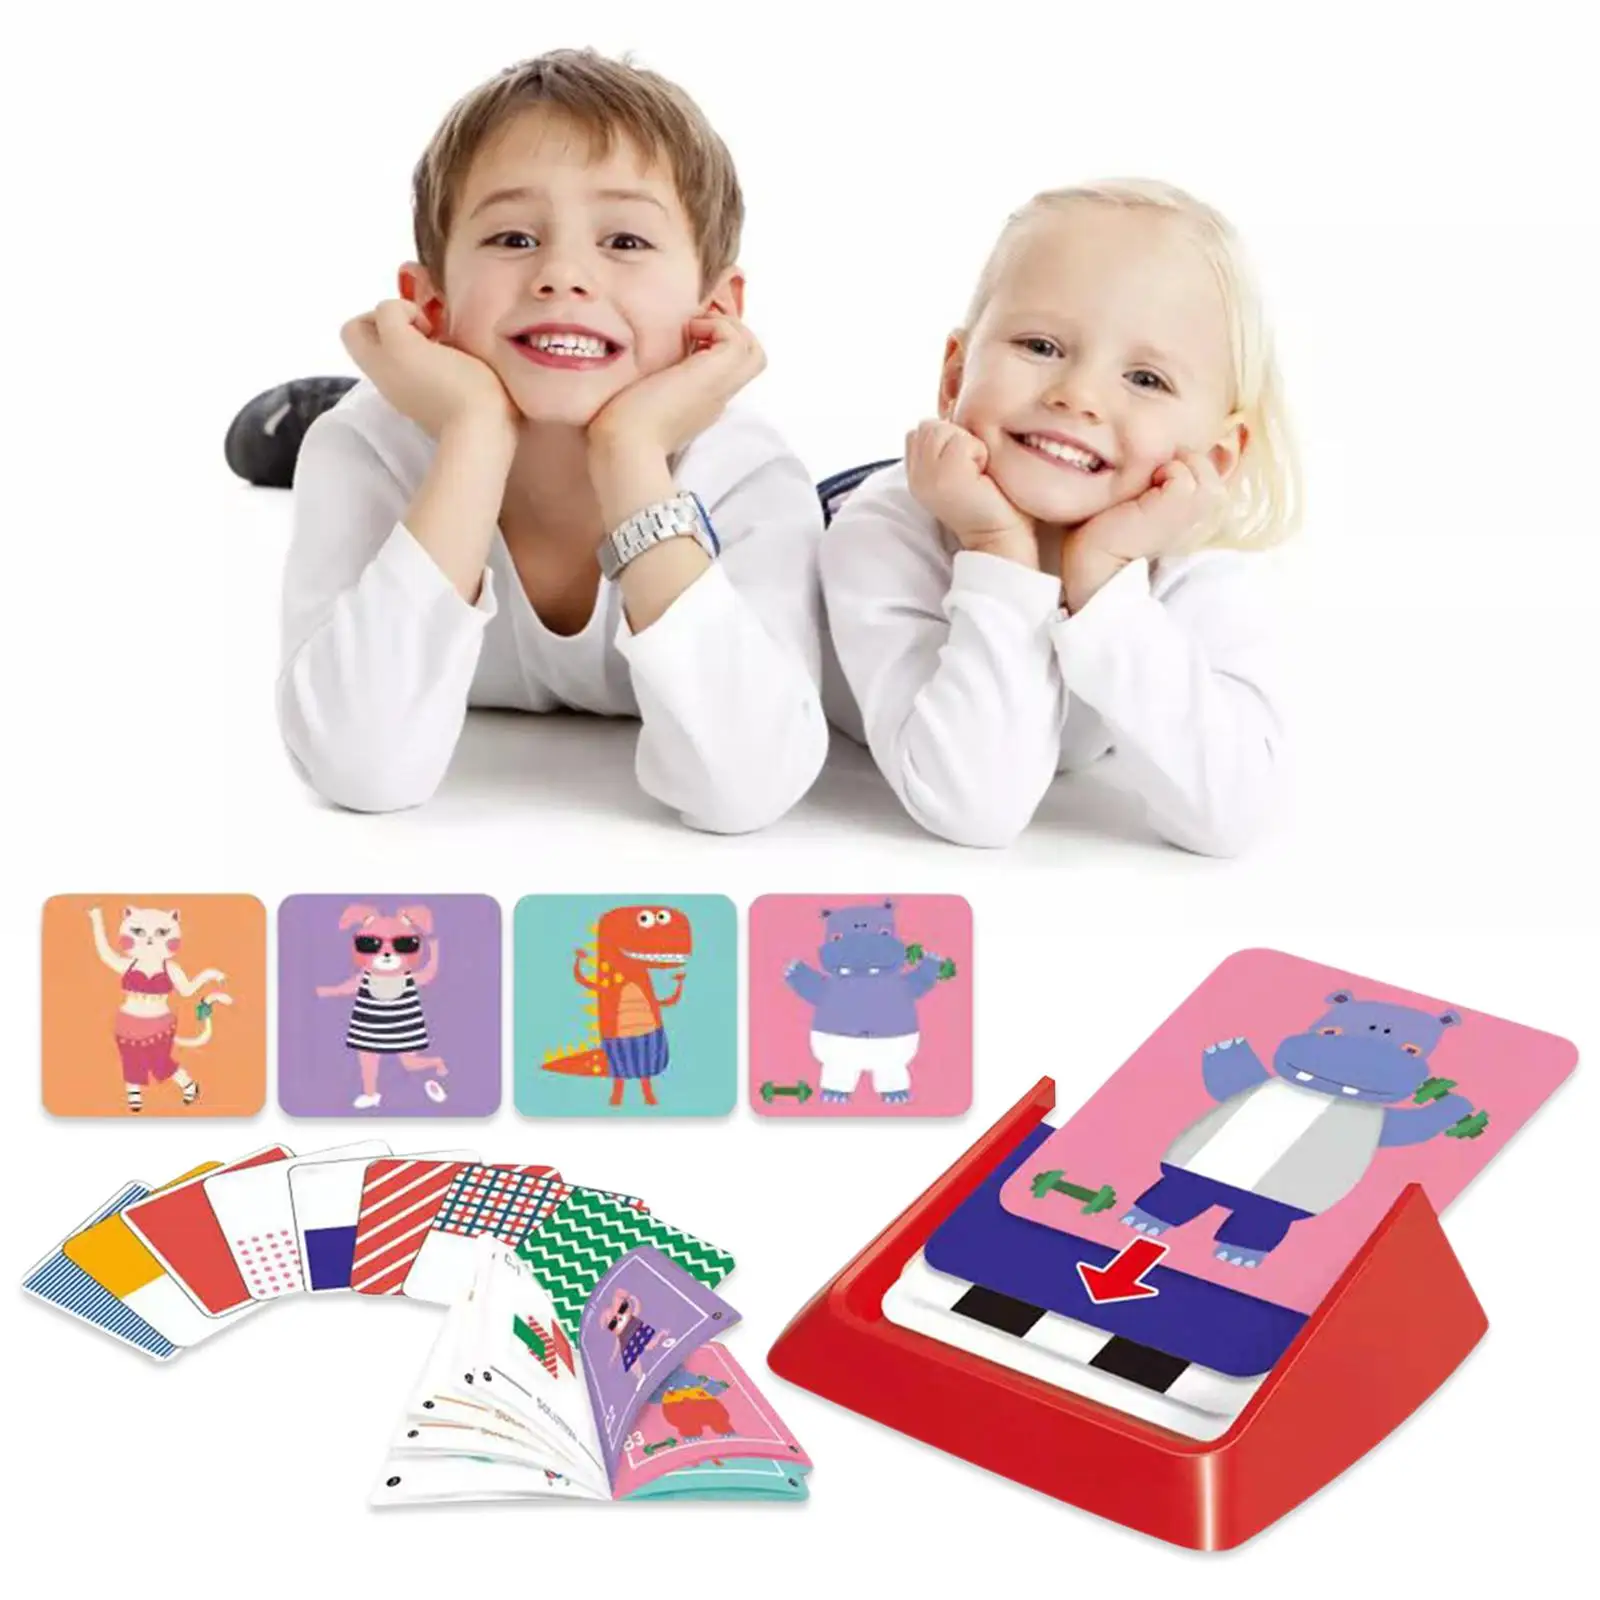 Changing Clothes Puzzles, Matching Game Changing Clothes Card Game Memory Game for Kids